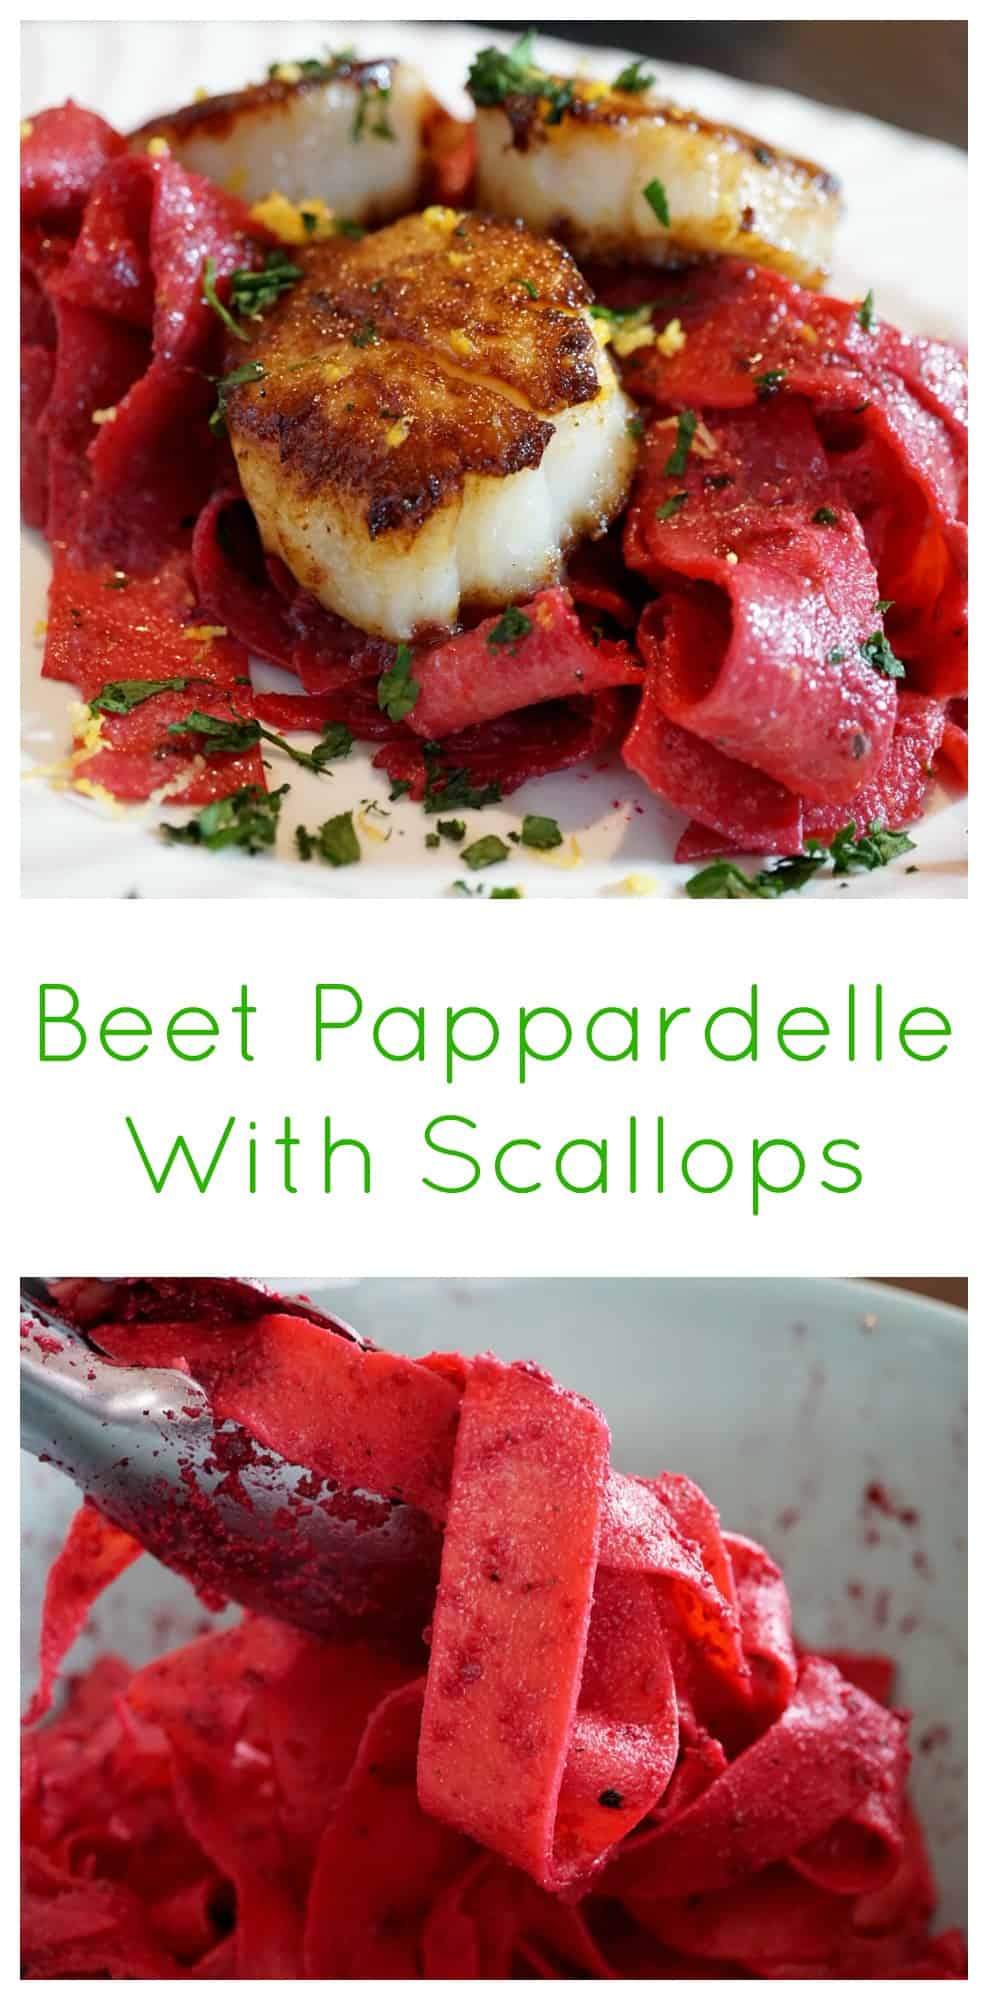 Beet Pappardelle With Scallops